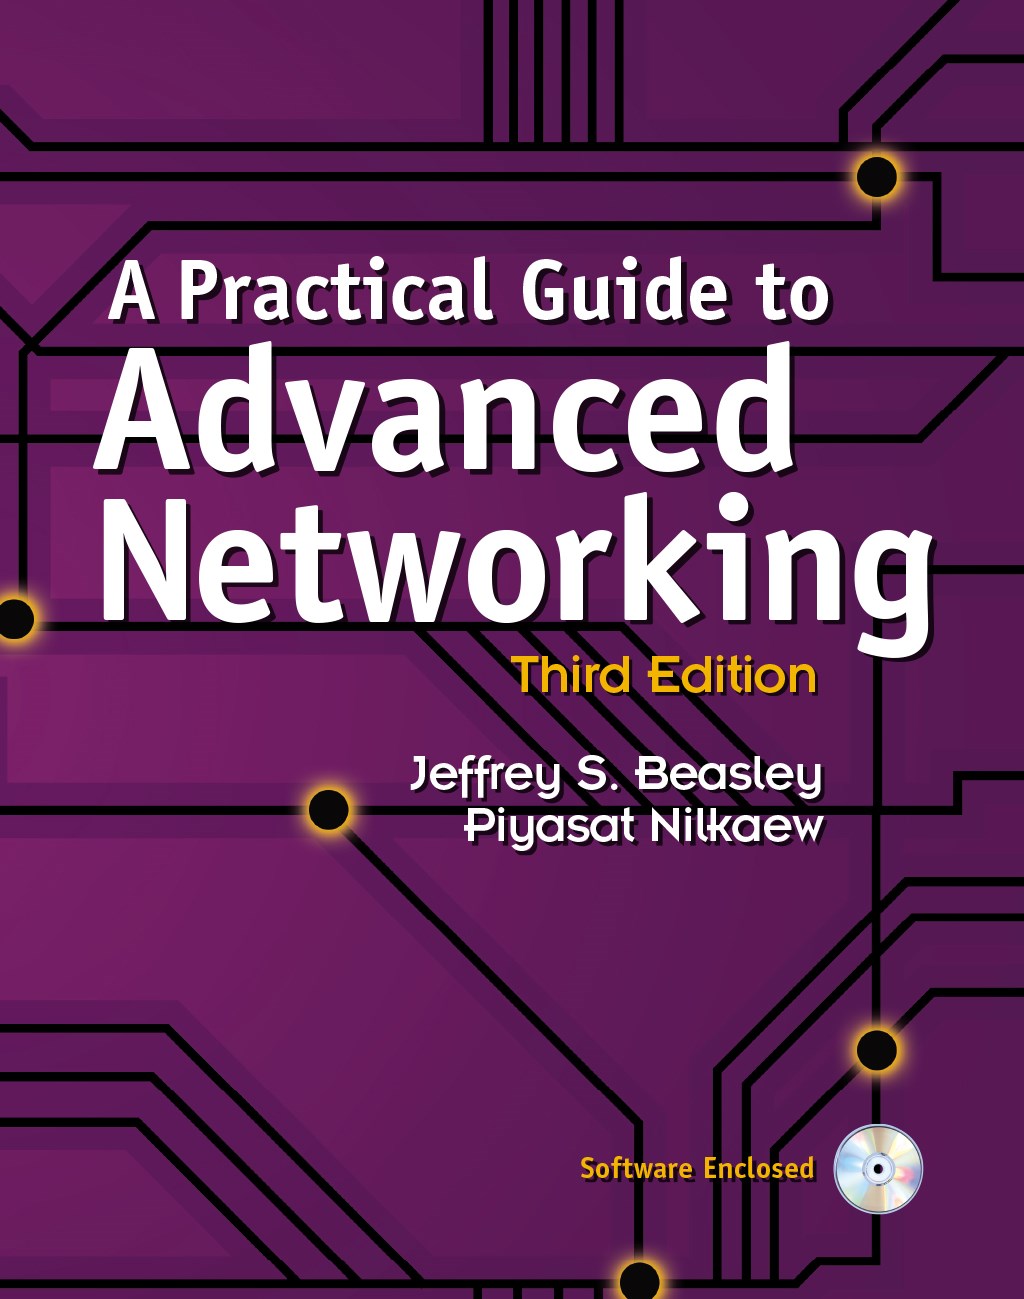 A Practical Guide to Advanced Networking (paperback), 3rd Edition